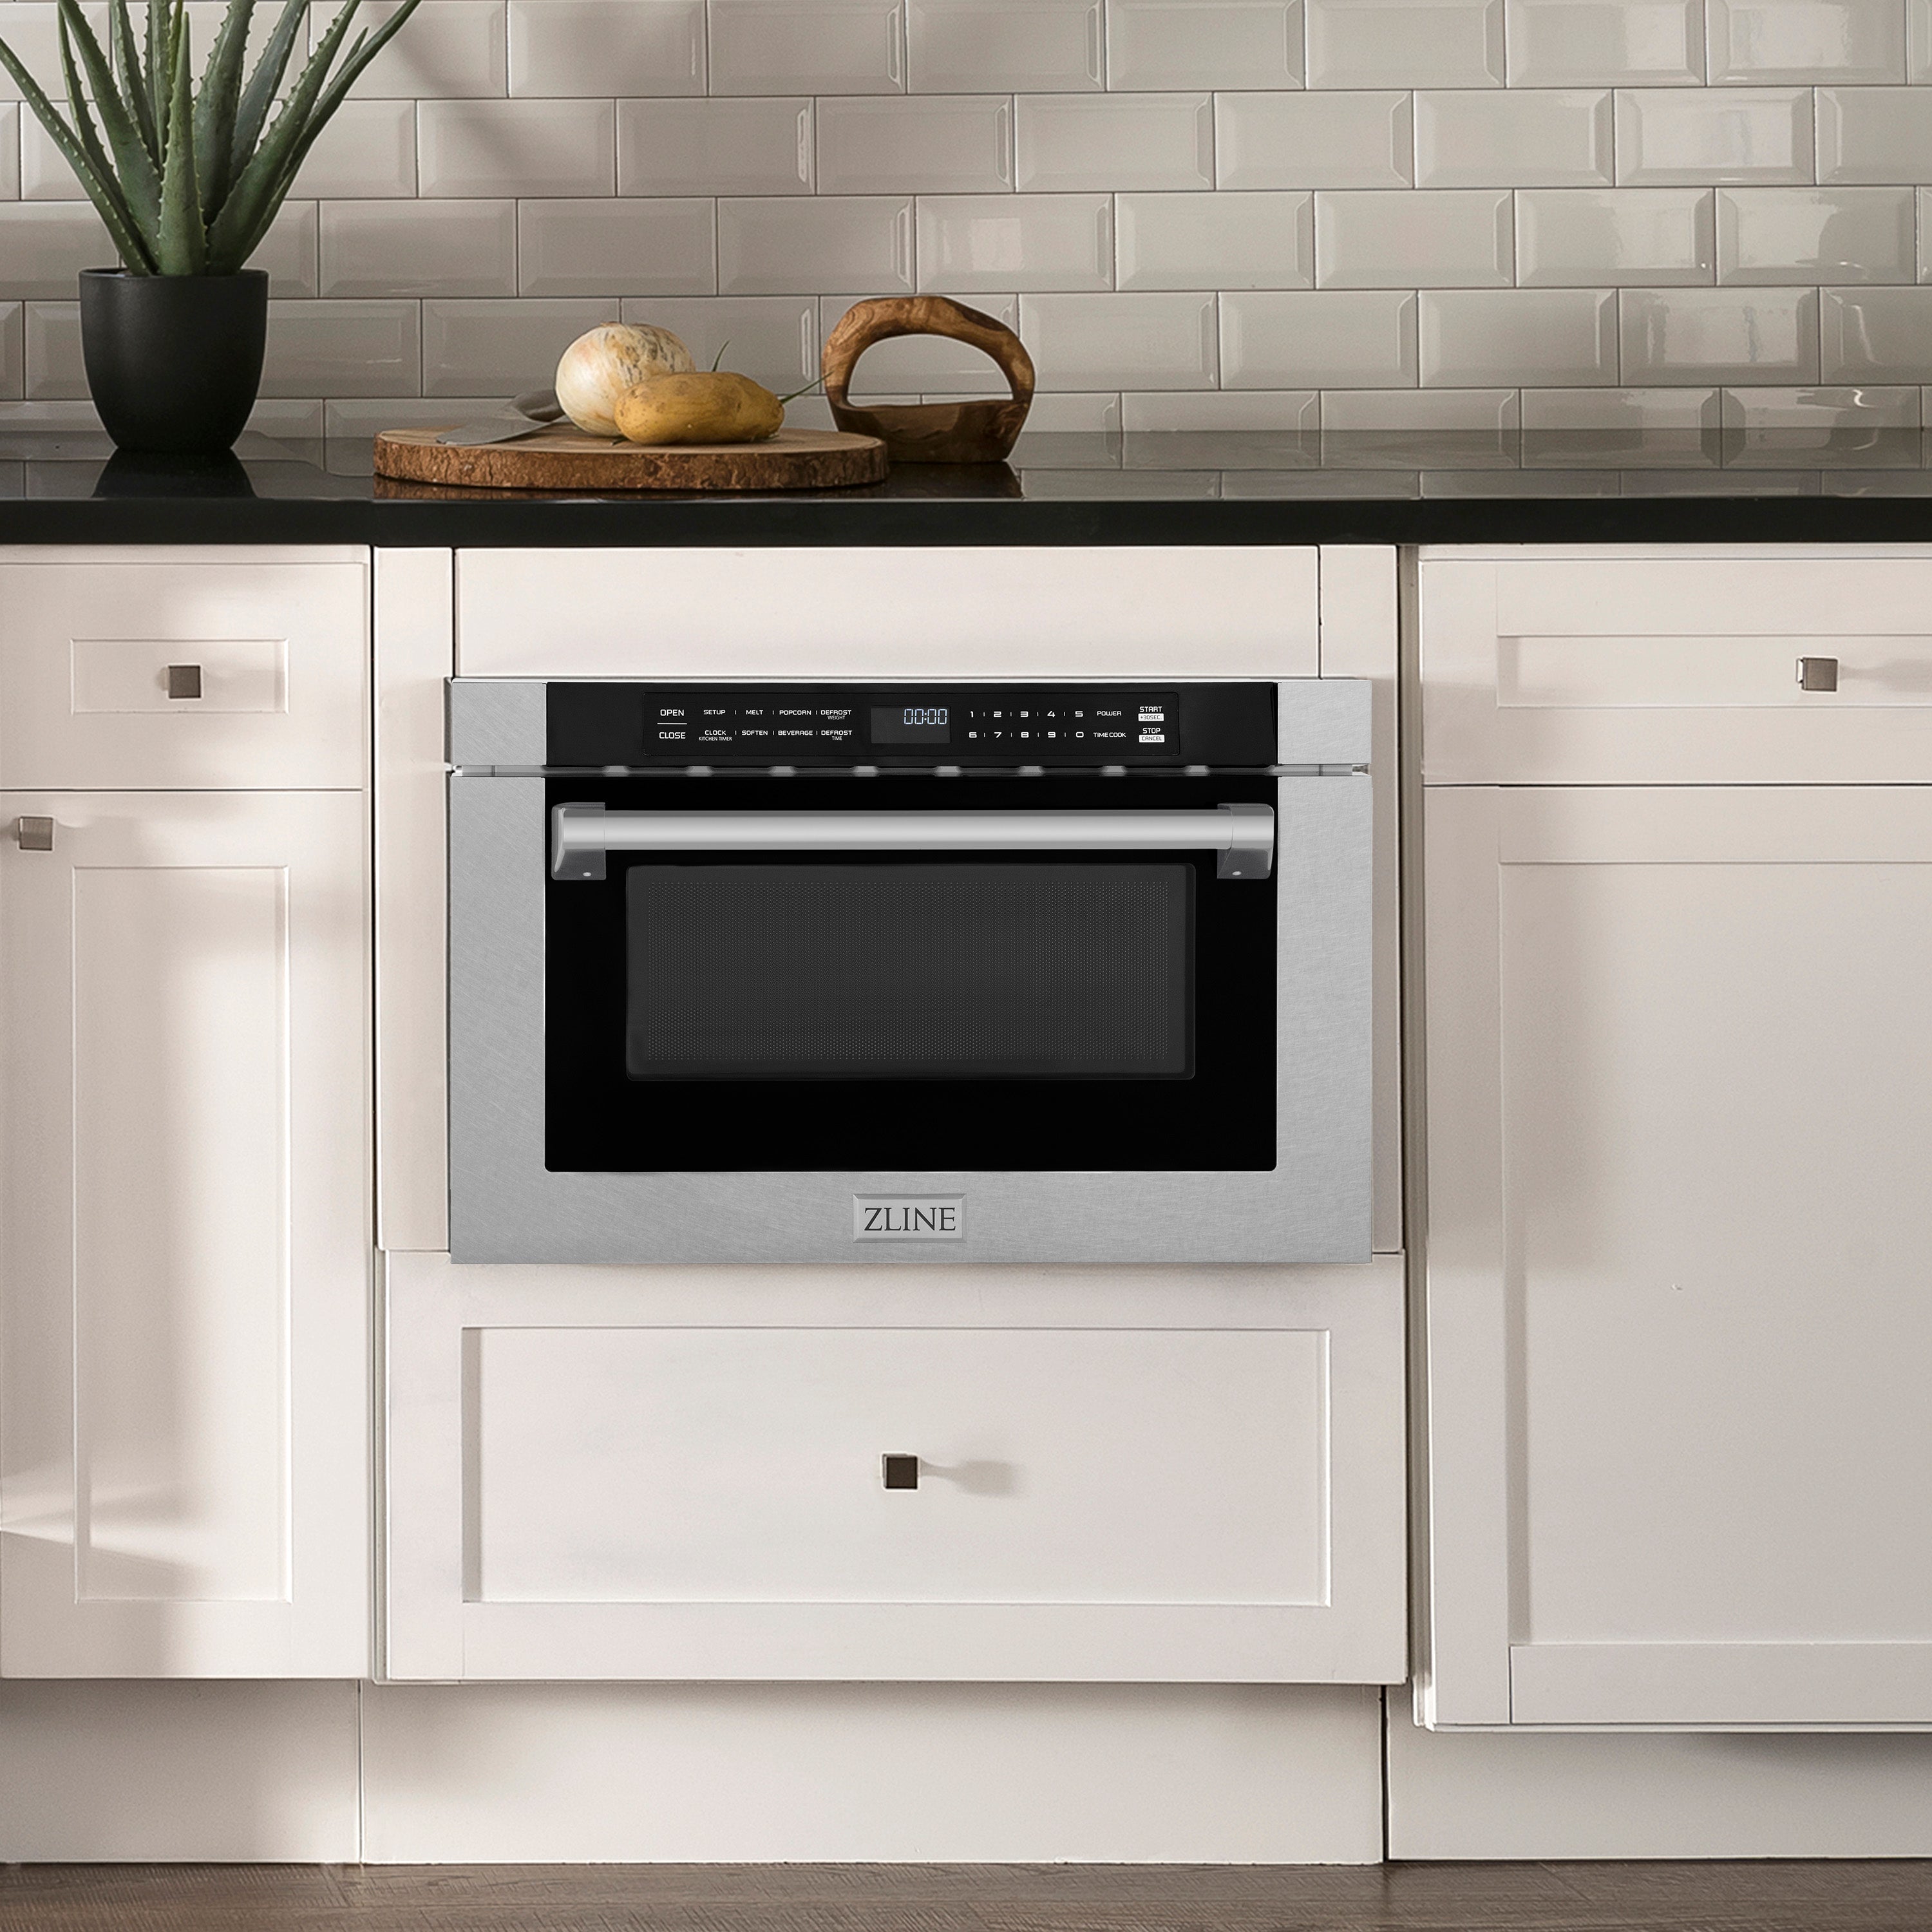 ZLINE 24 in. 1.2 cu. ft. Built-in Microwave Drawer with a Traditional Handle in DuraSnow Stainless Steel (MWD-1-SS-H) in Rustic Farmhouse Kitchen with white cabinets and black countertops.